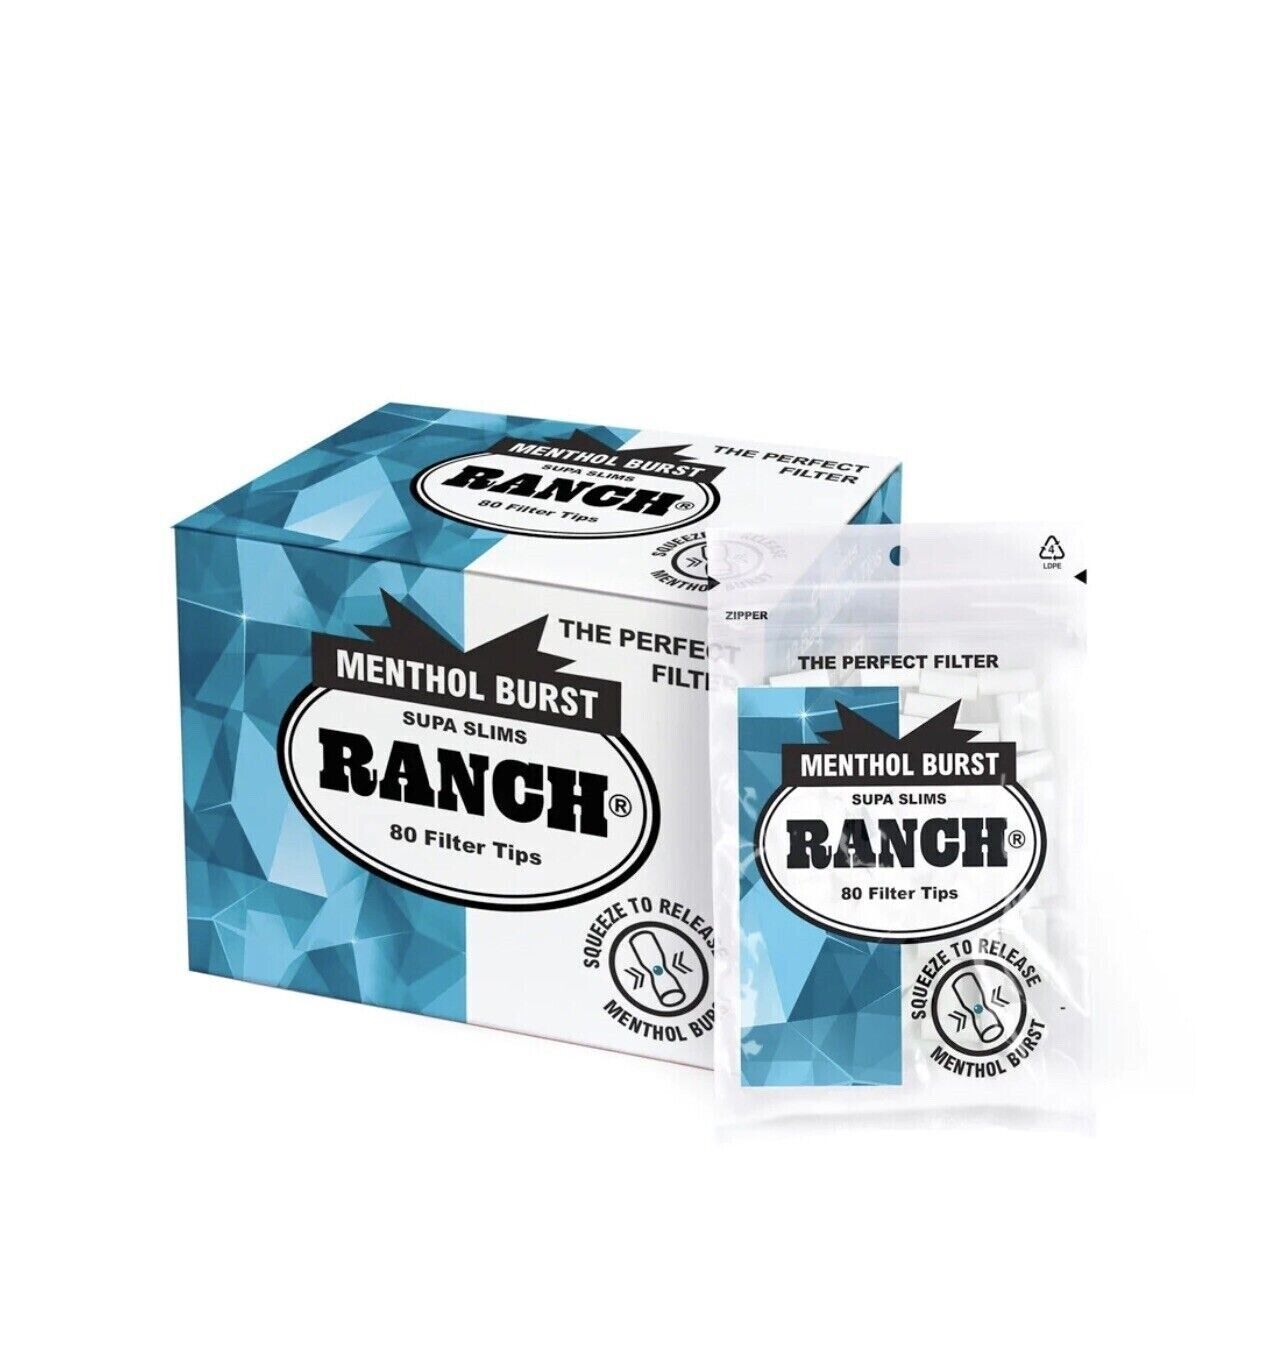 Ranch Supa slims Menthol burst 75% more flavour 12 bags of filters 80 filter tips per bag